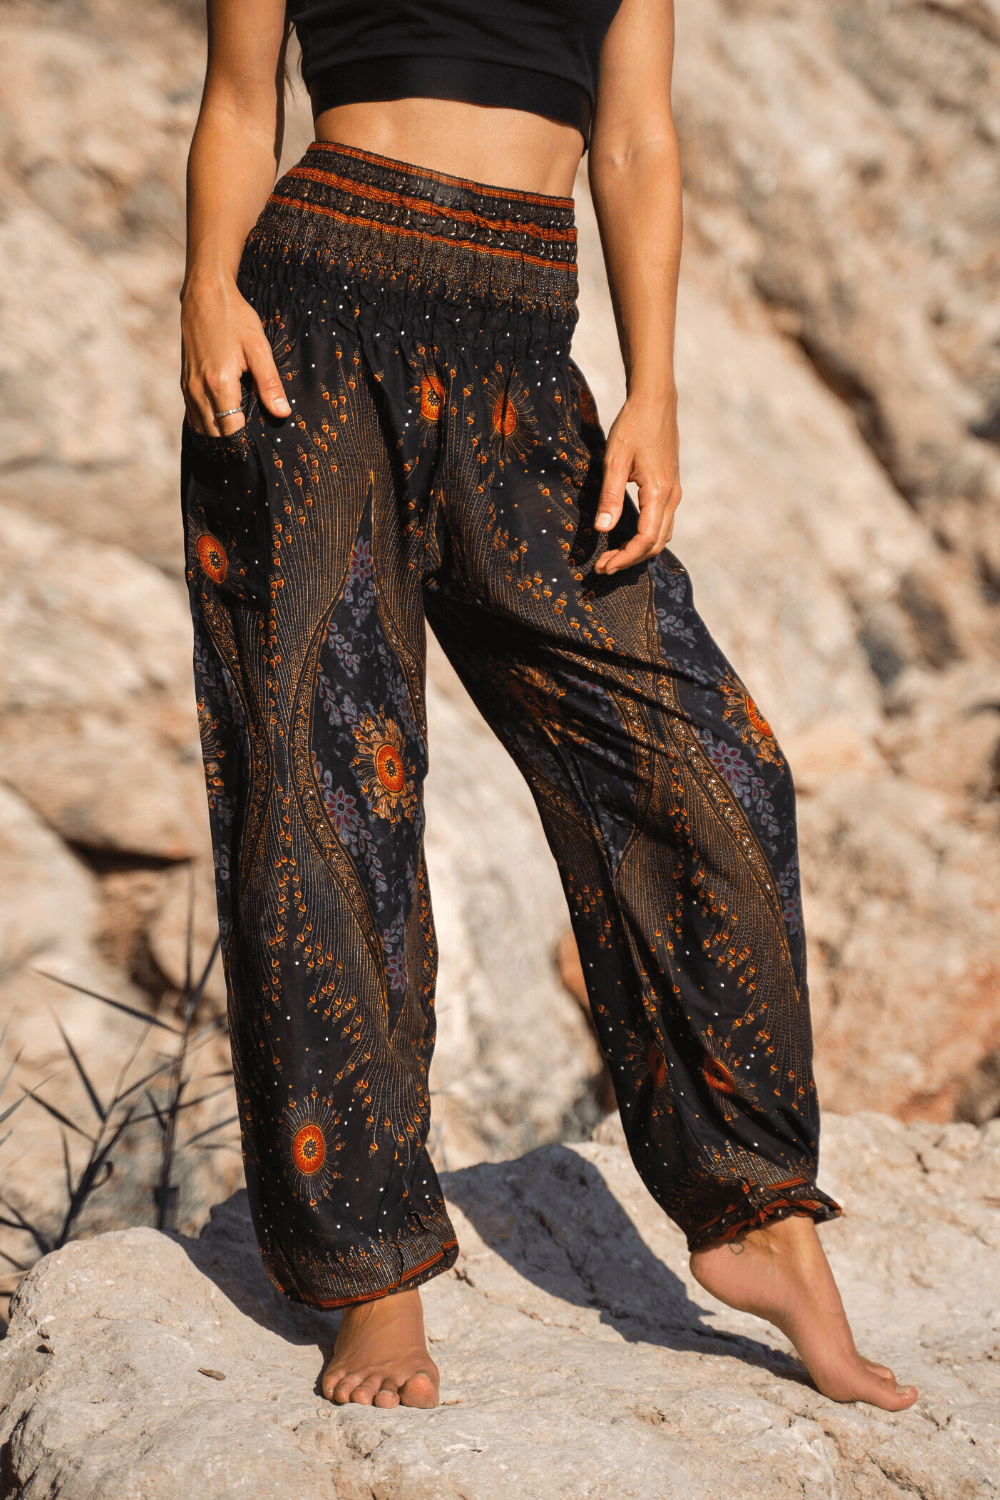 Plus Size Harem Pants - How to style and Where to buy – Hippie Pants